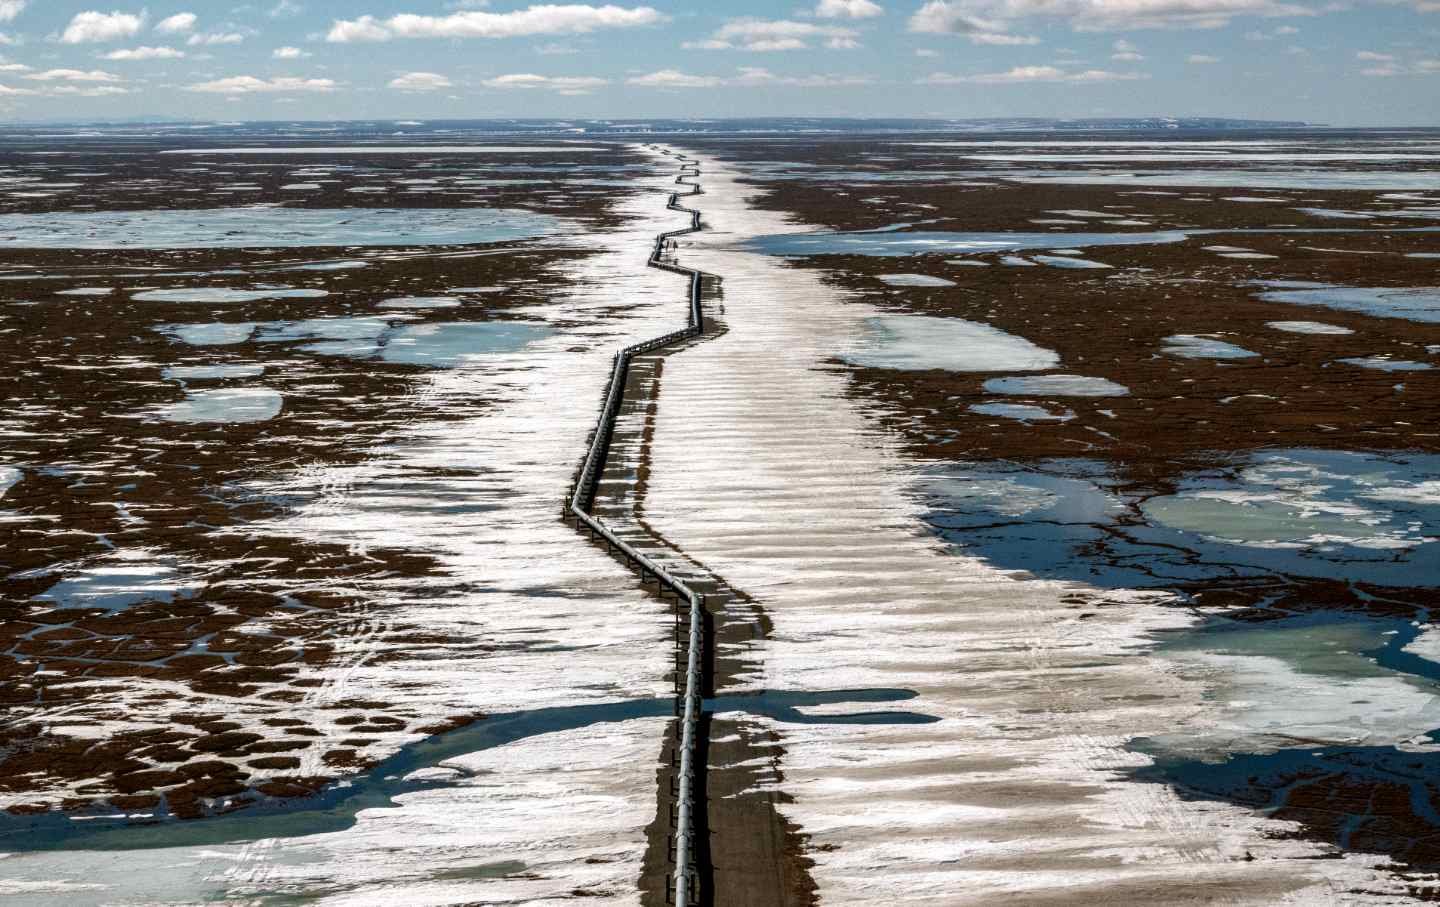 Image of a pipeline crossing tundra